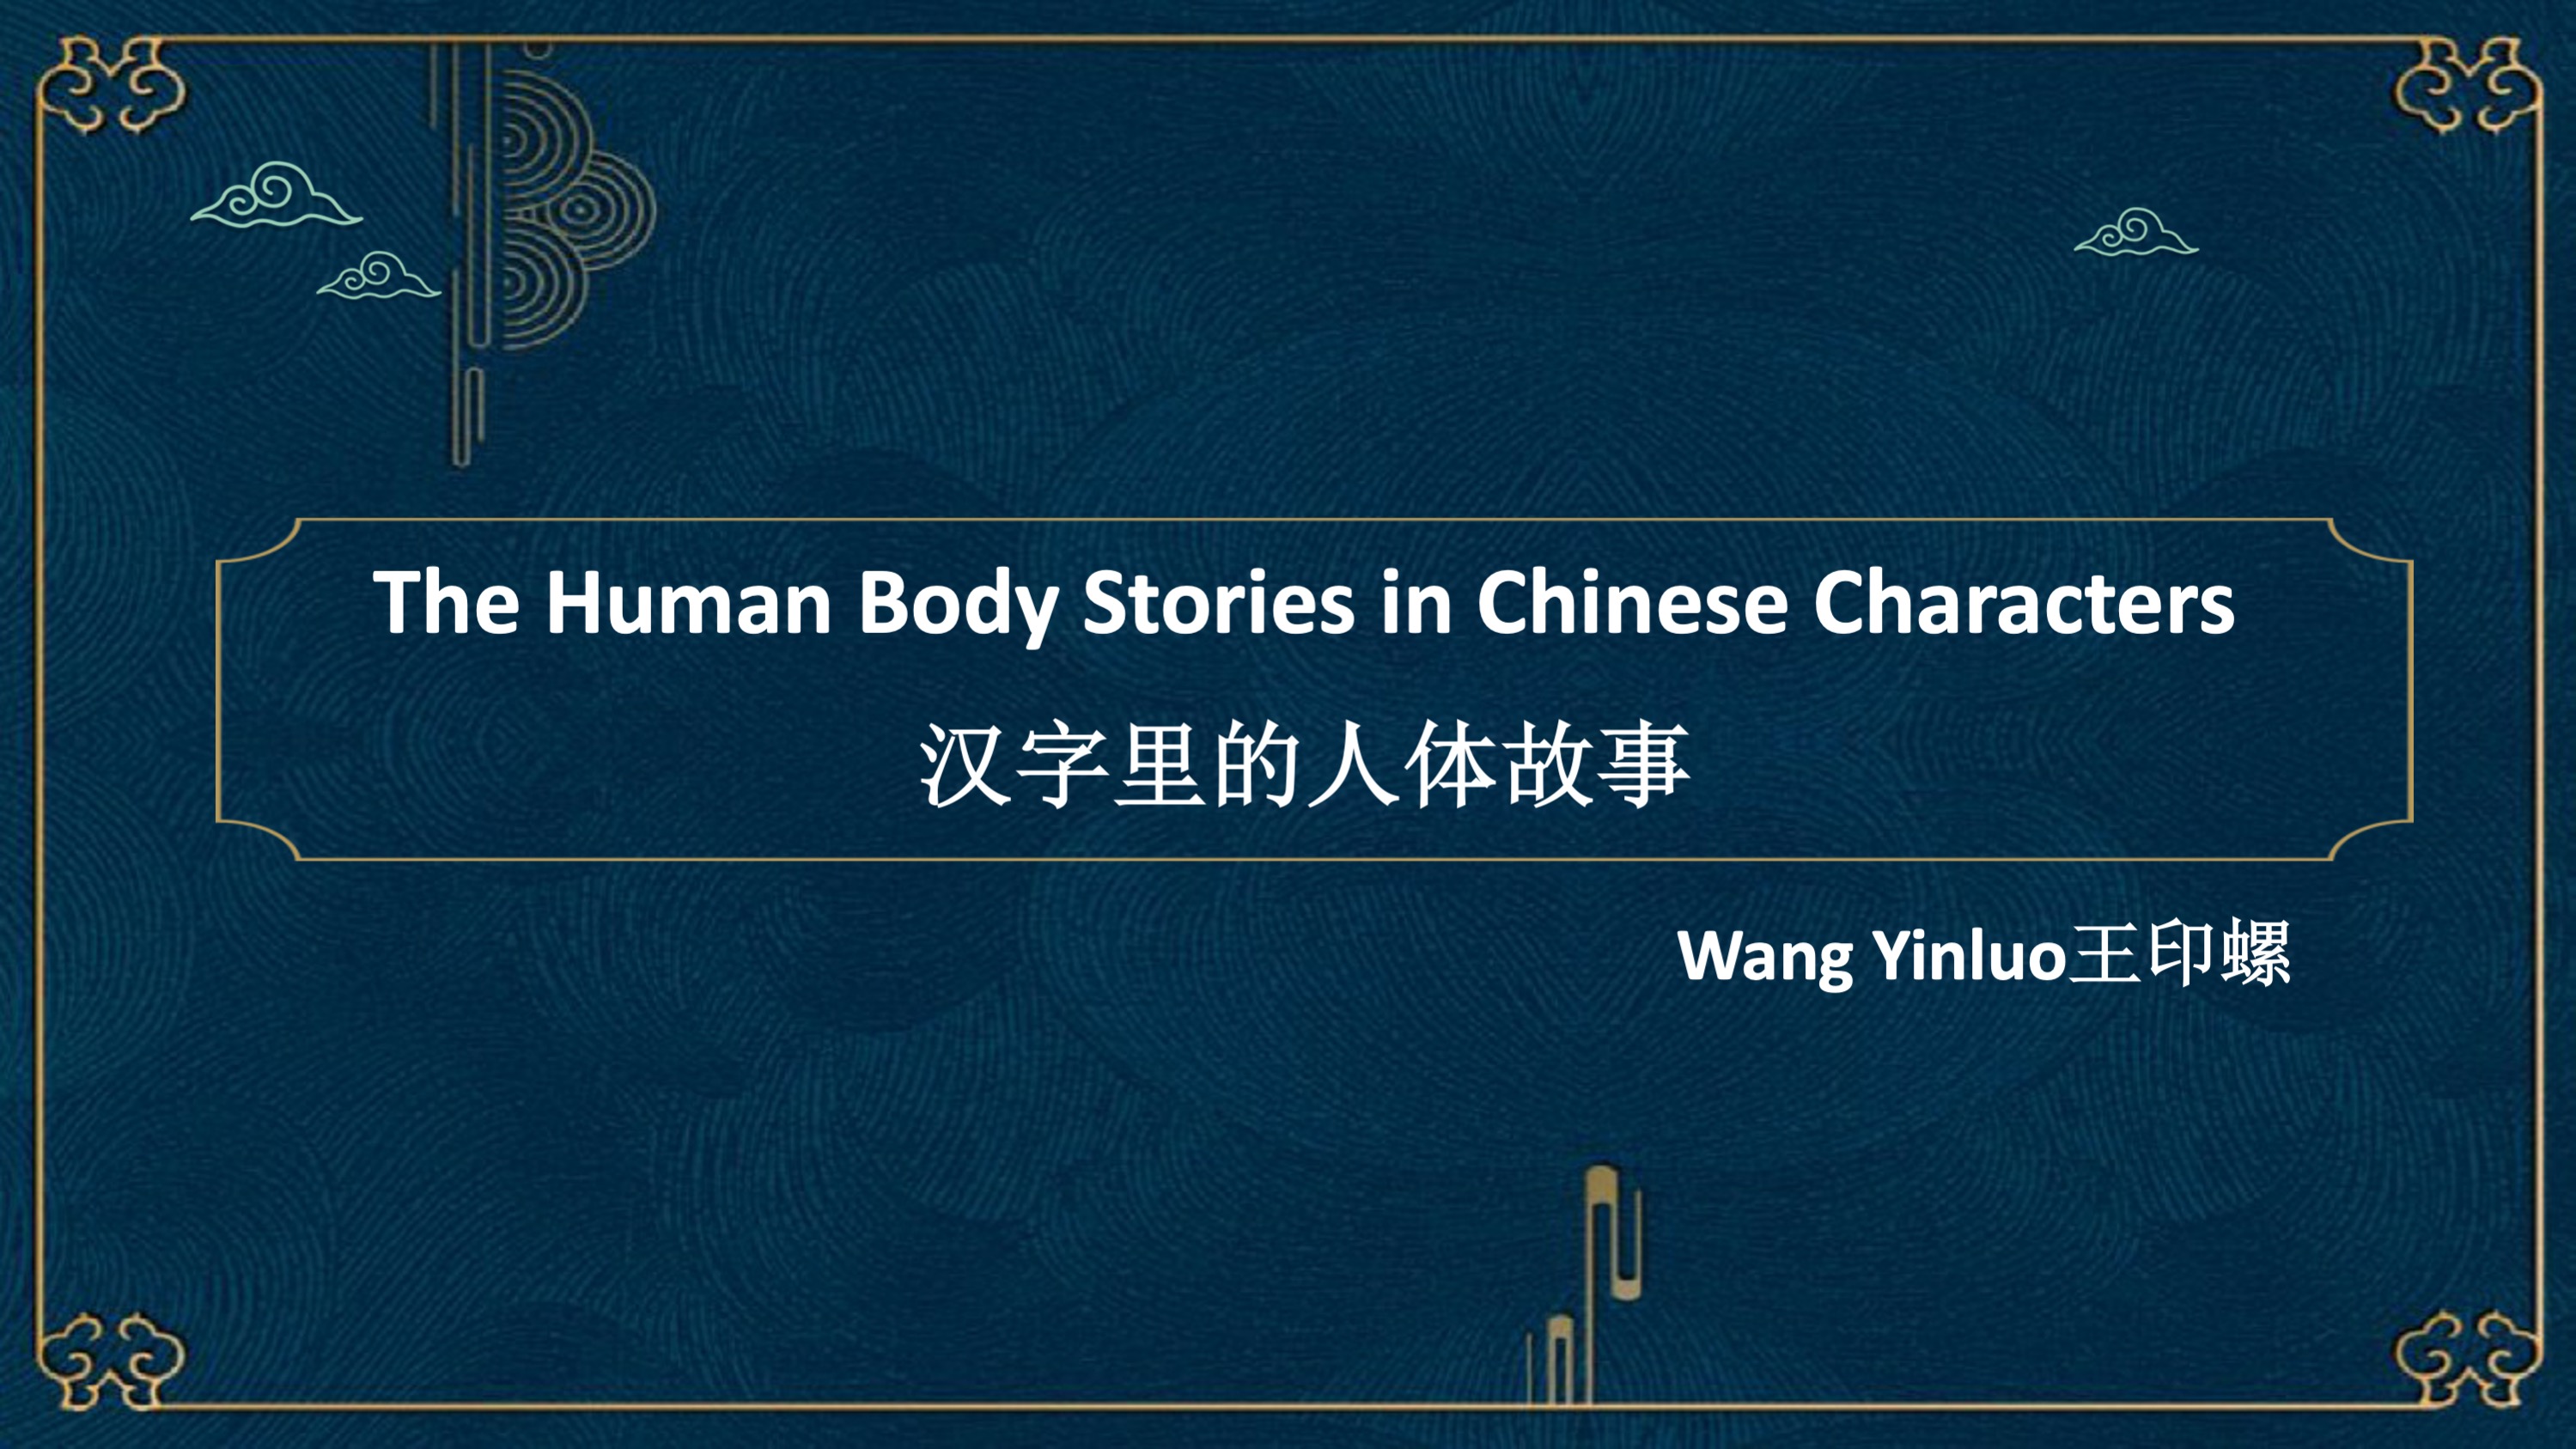 The Human Body Stories in Chinese Characters